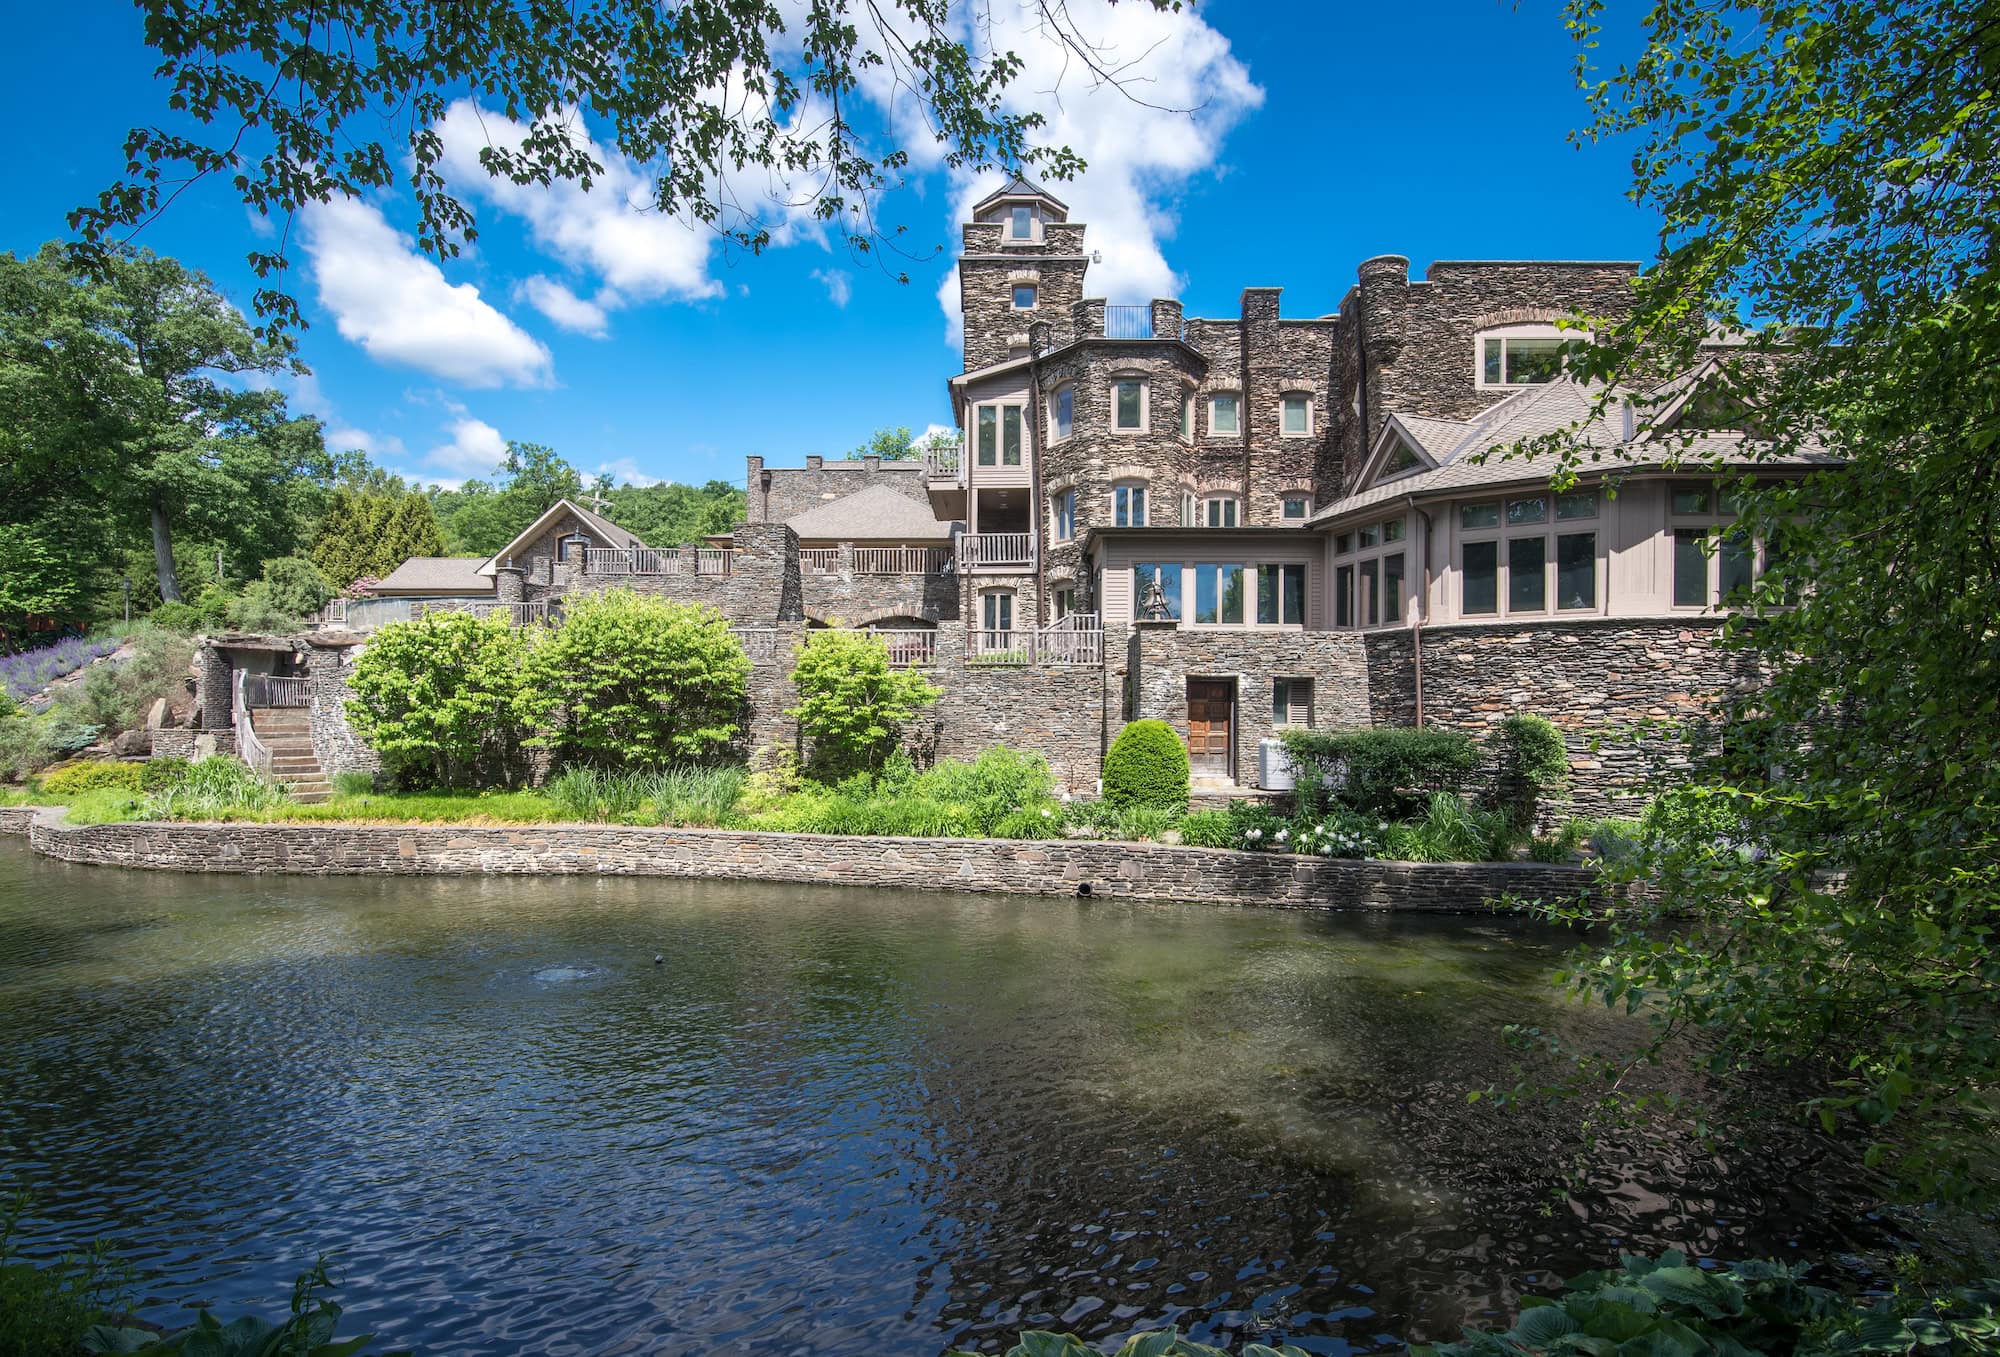 Derek Jeter Sells His Iconic Upstate New York Castle After Years of Price Cuts